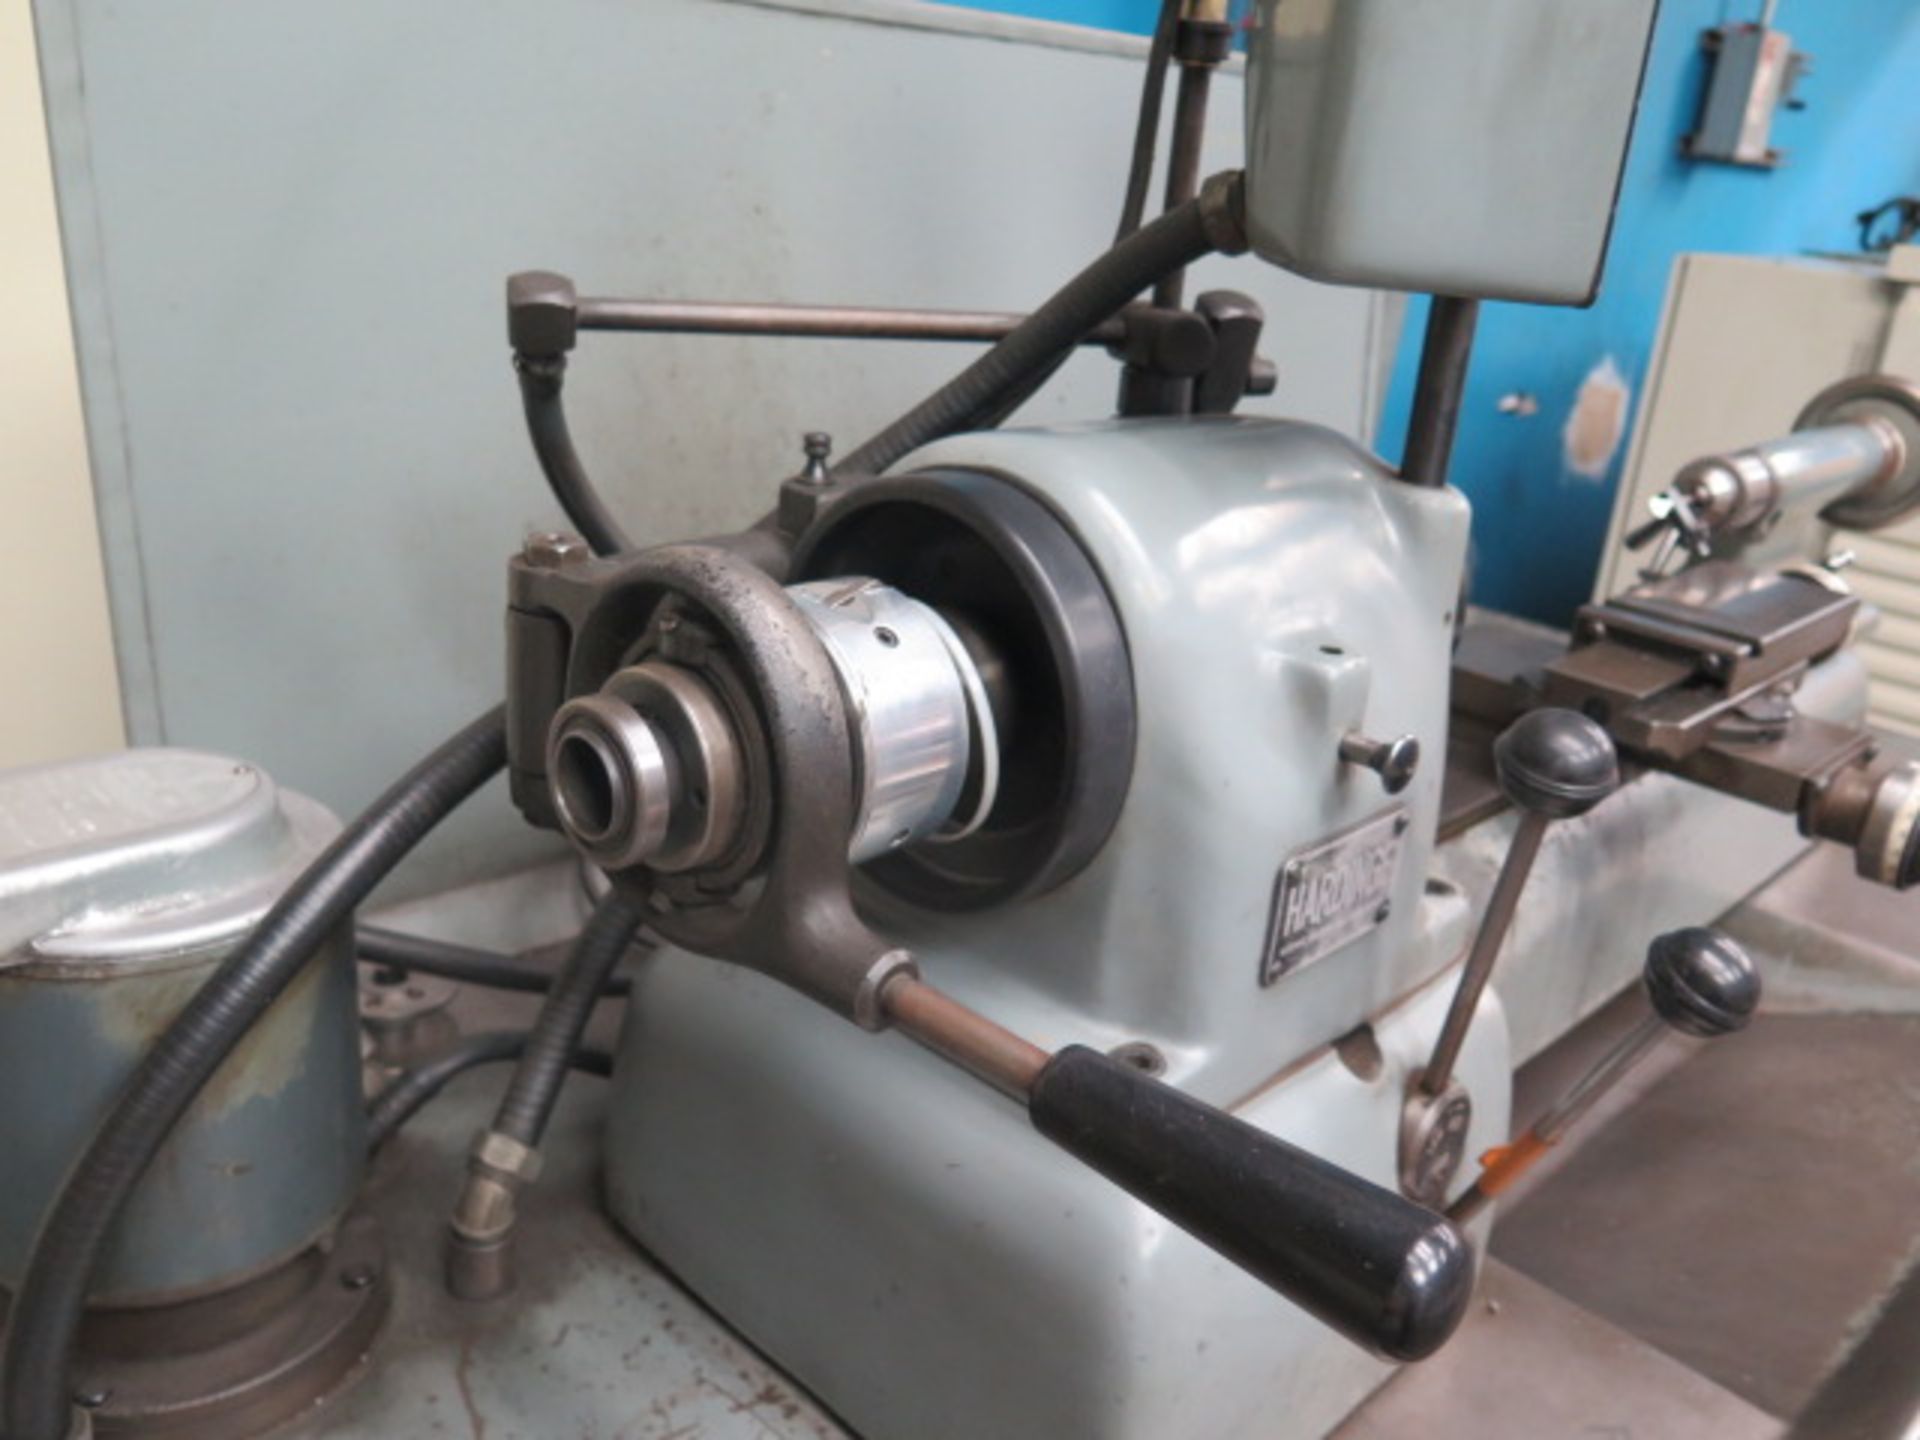 Hardinge DSM-59 Narrow Bed Second OP Lathe s/n DV-59-14302 w/ 230-3500 RPM, 5C Spindle, SOLD AS IS - Image 5 of 9